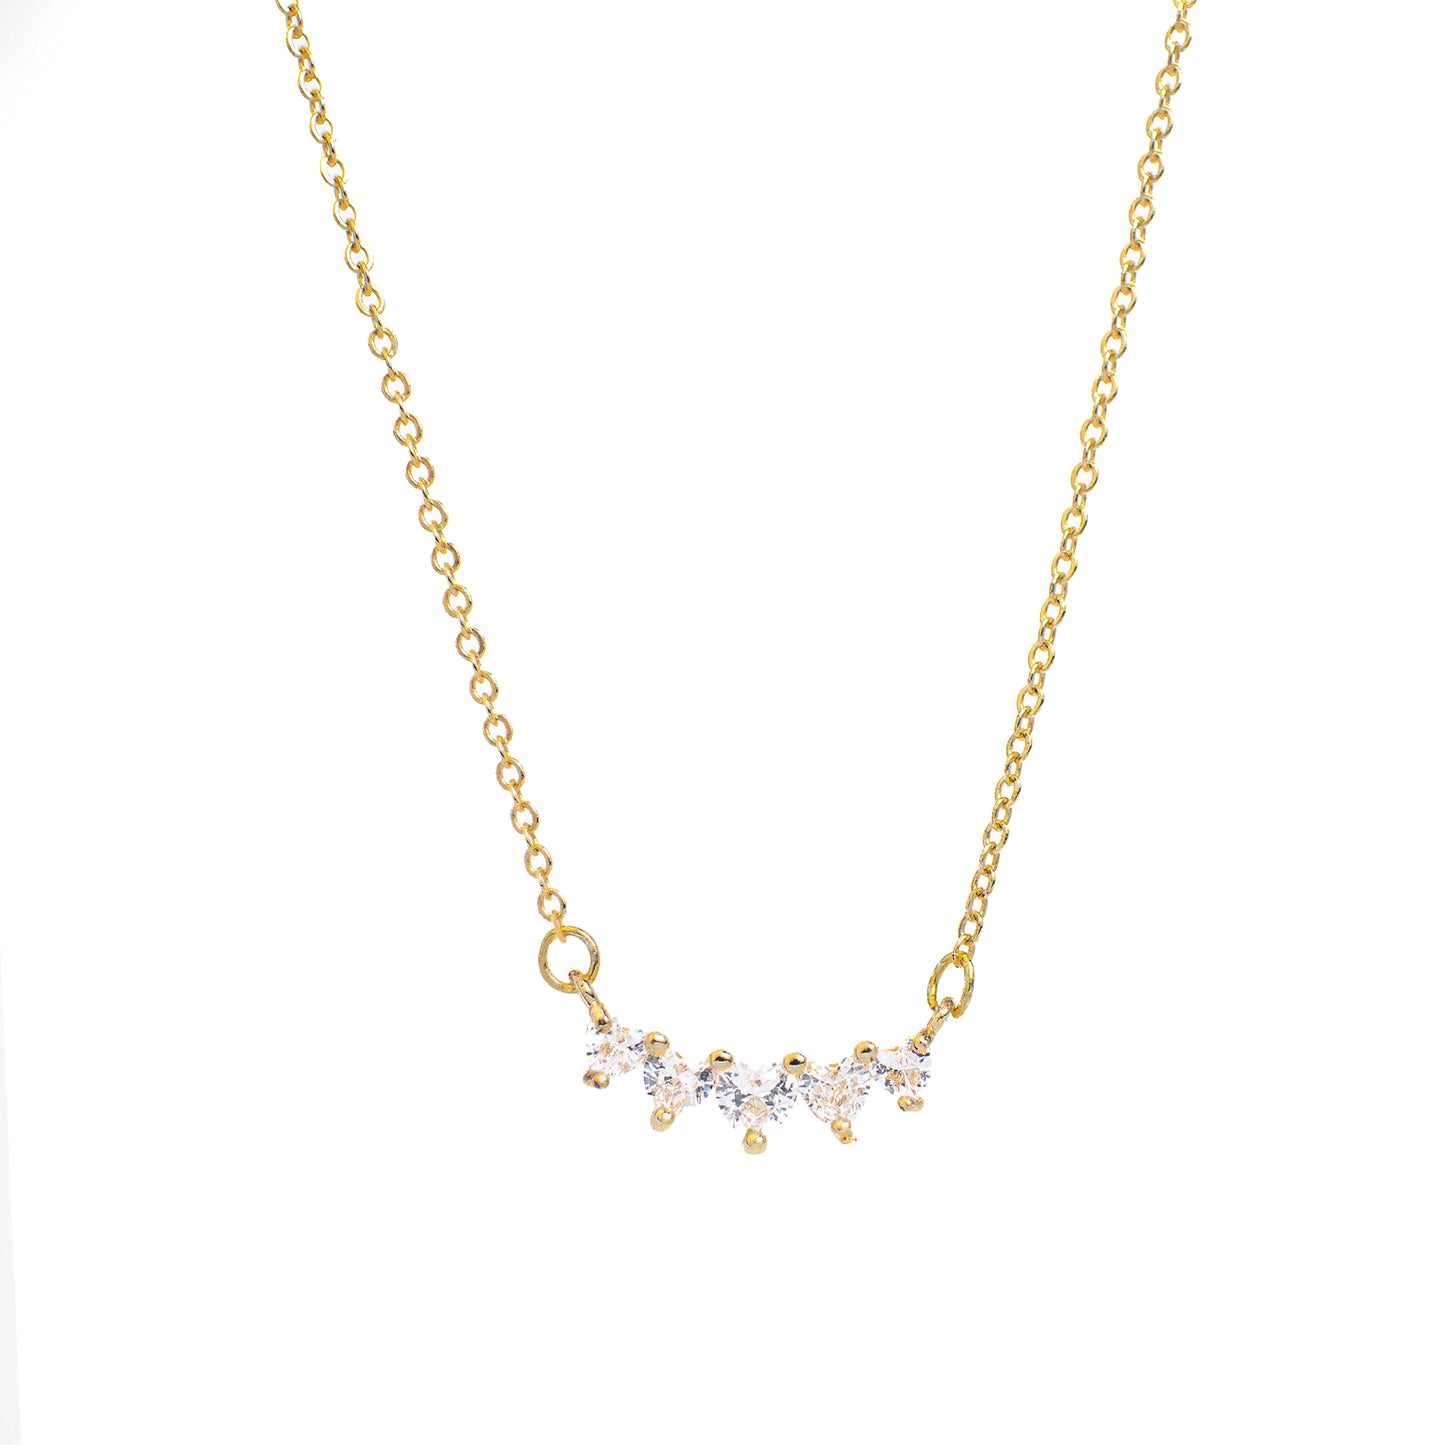 This photo features a thin chain necklace made of 14K gold-plated sterling silver, paired with a rectangular tag pendant with Five Zircon Heart Necklace